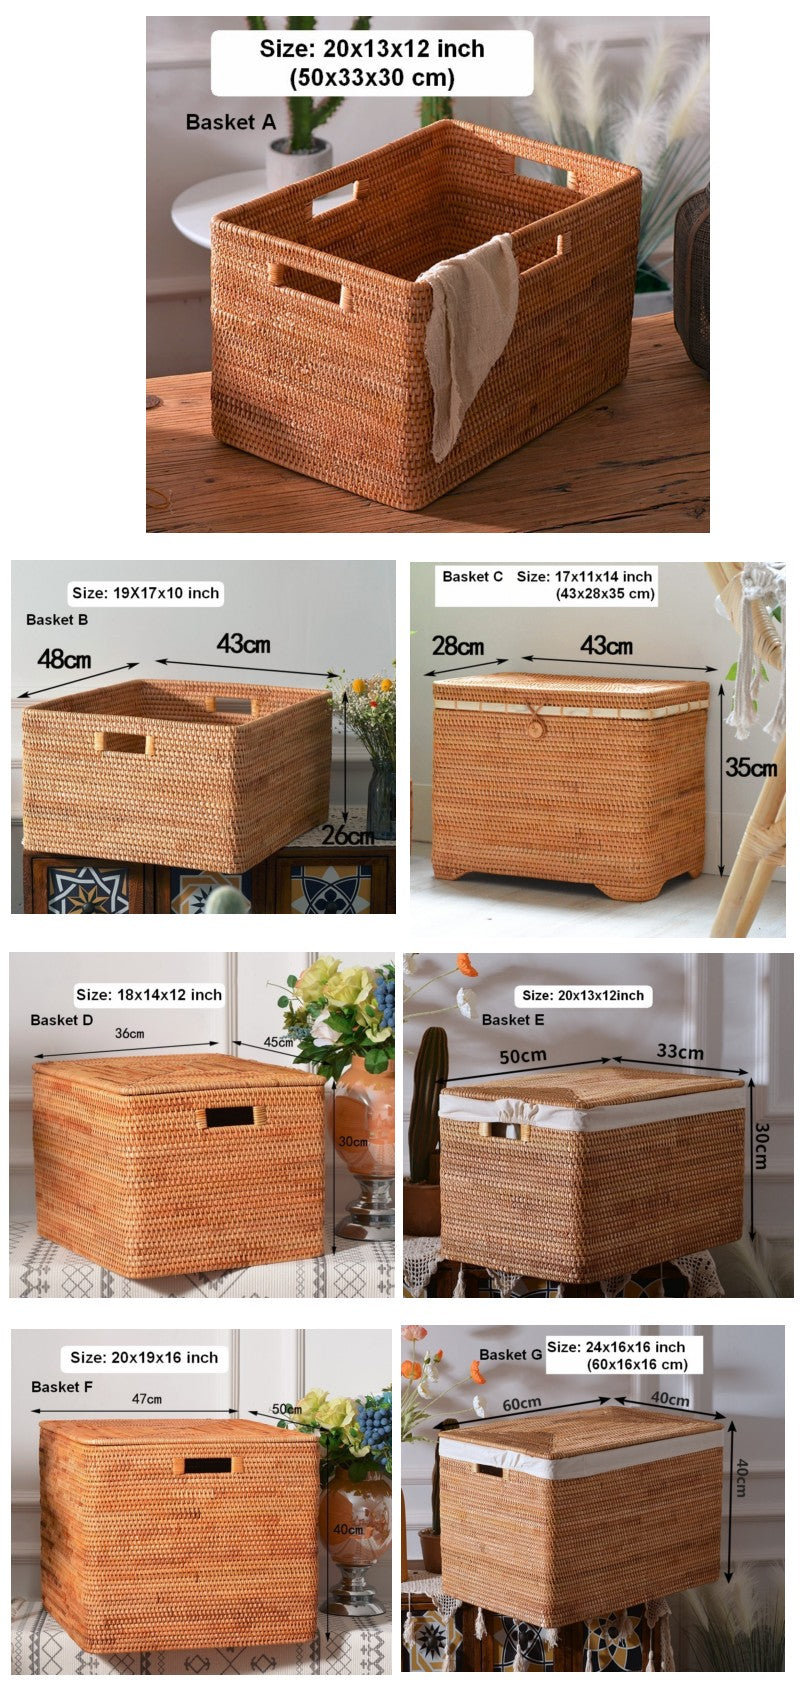 Large Laundry Storage Basket for Clothes, Rattan Basket, Rectangular Storage Basket, Storage Baskets for Bedroom